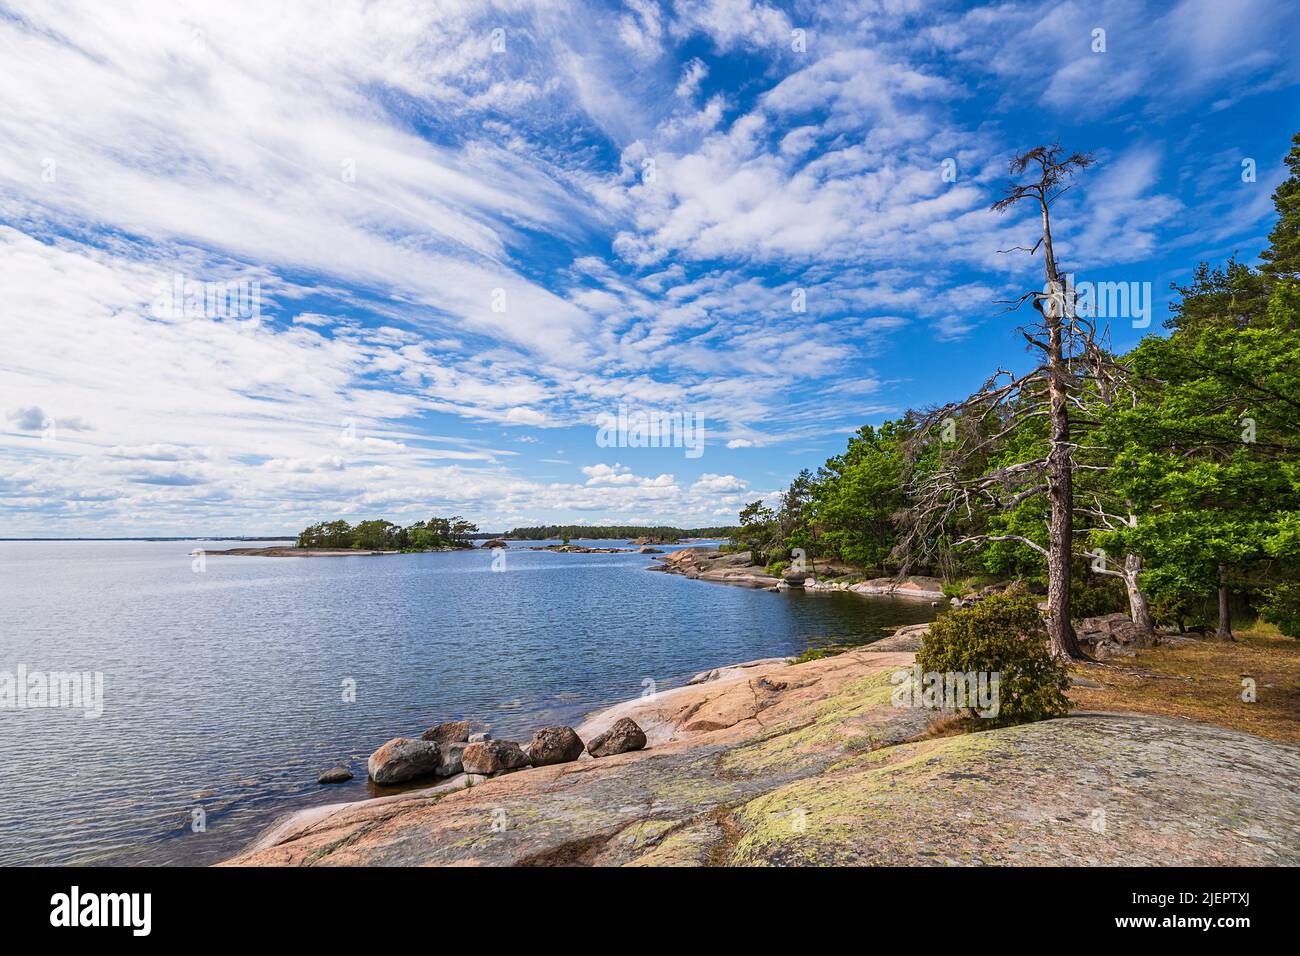 Landscape with rocks and trees near Oskashamn in Sweden. Stock Photo